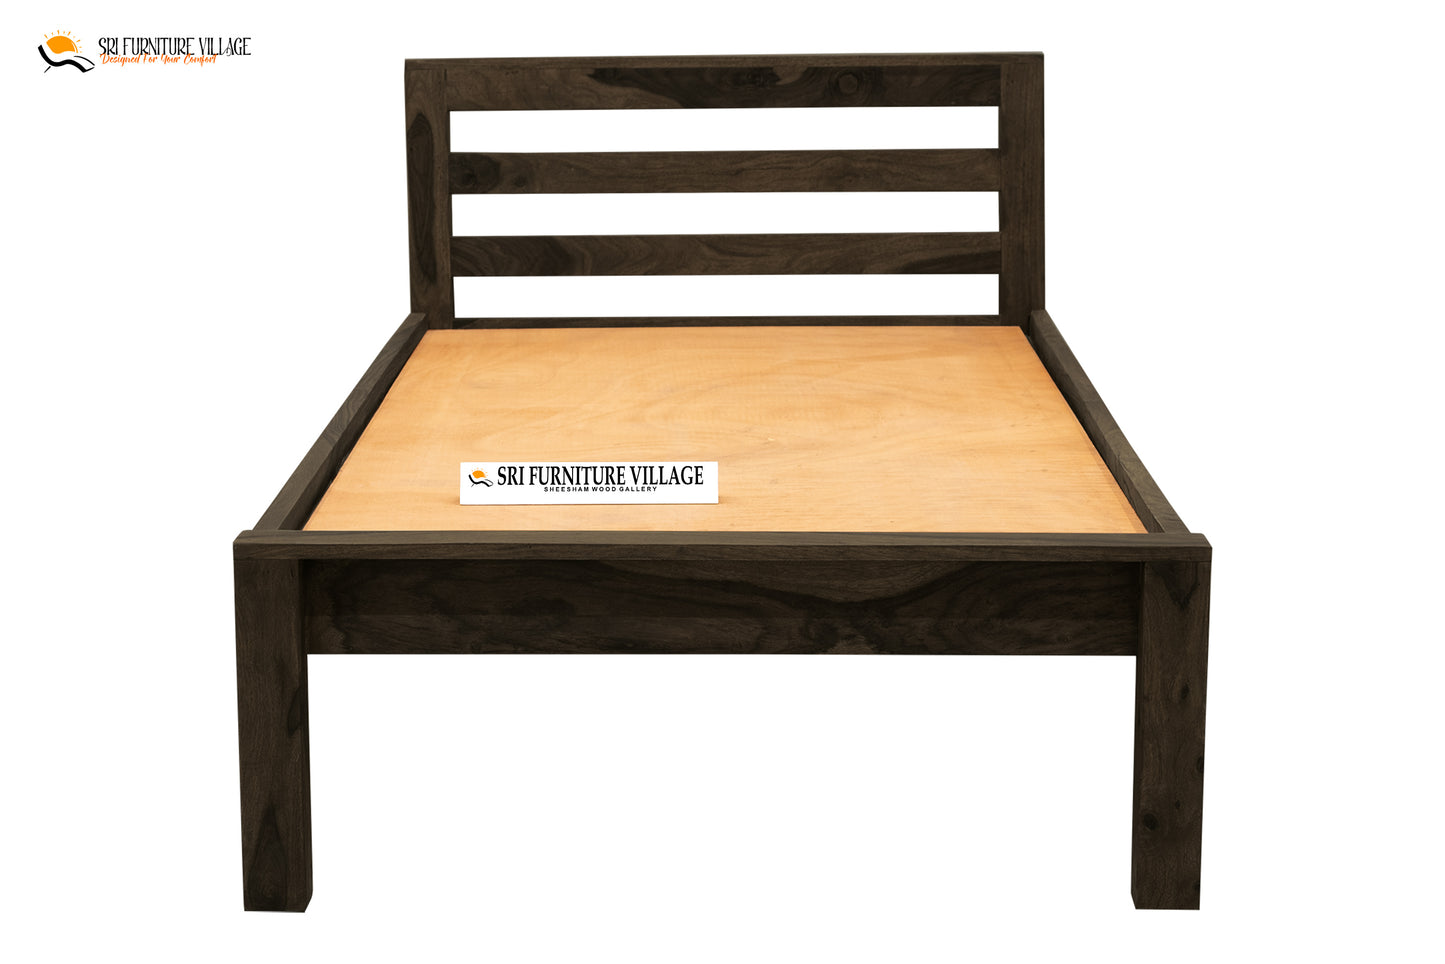 Stone / Single Size Bed 